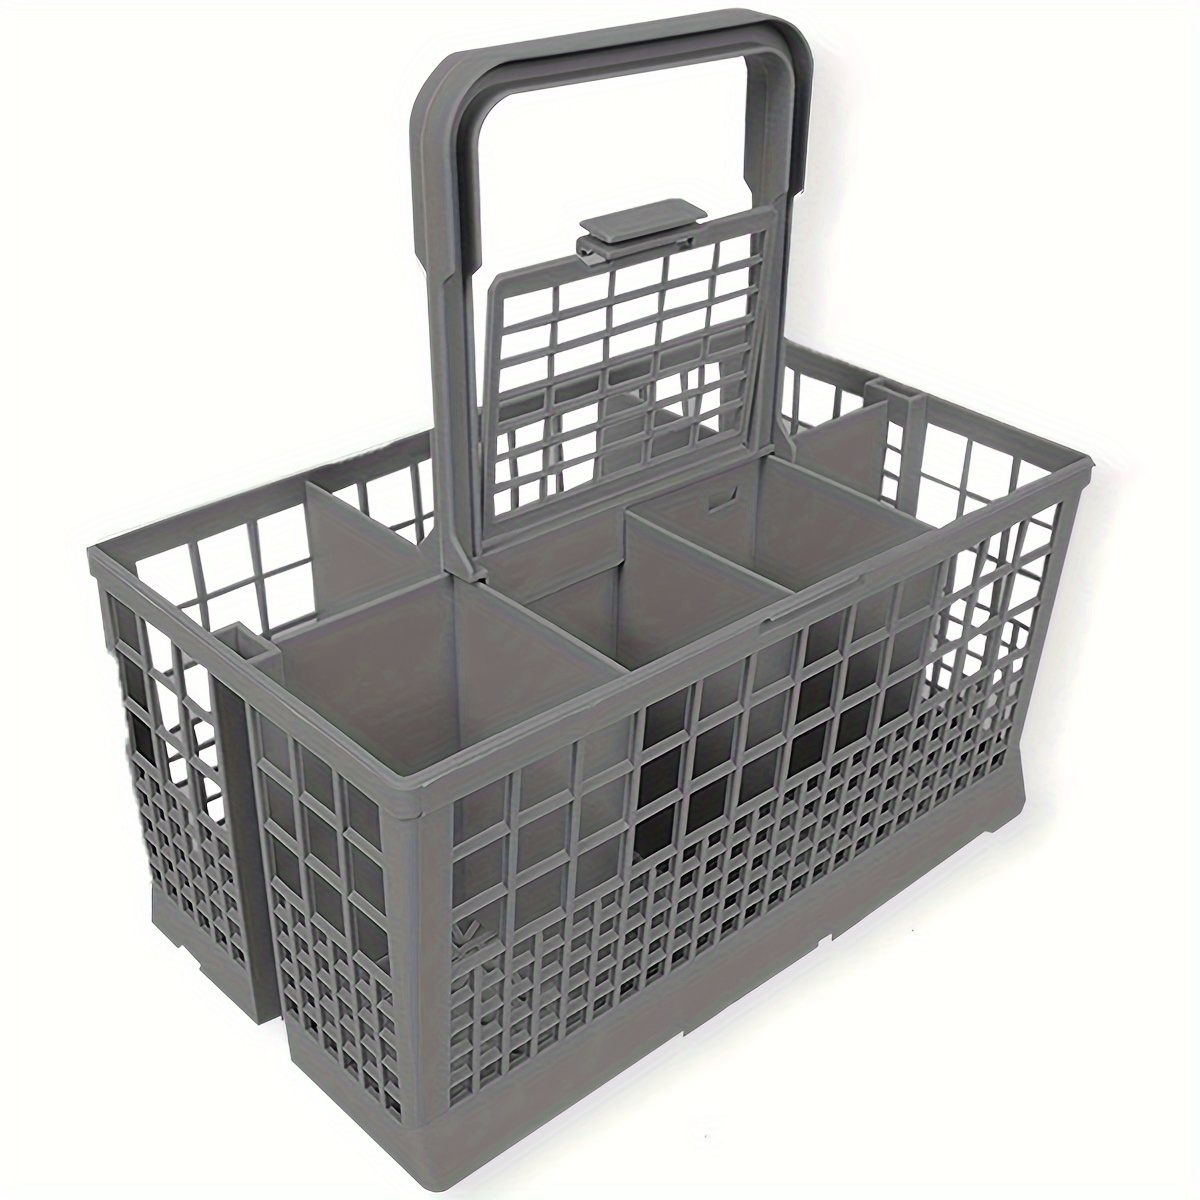 Universal Dishwasher Cutlery Basket Suits For Many Brands 21 X 16